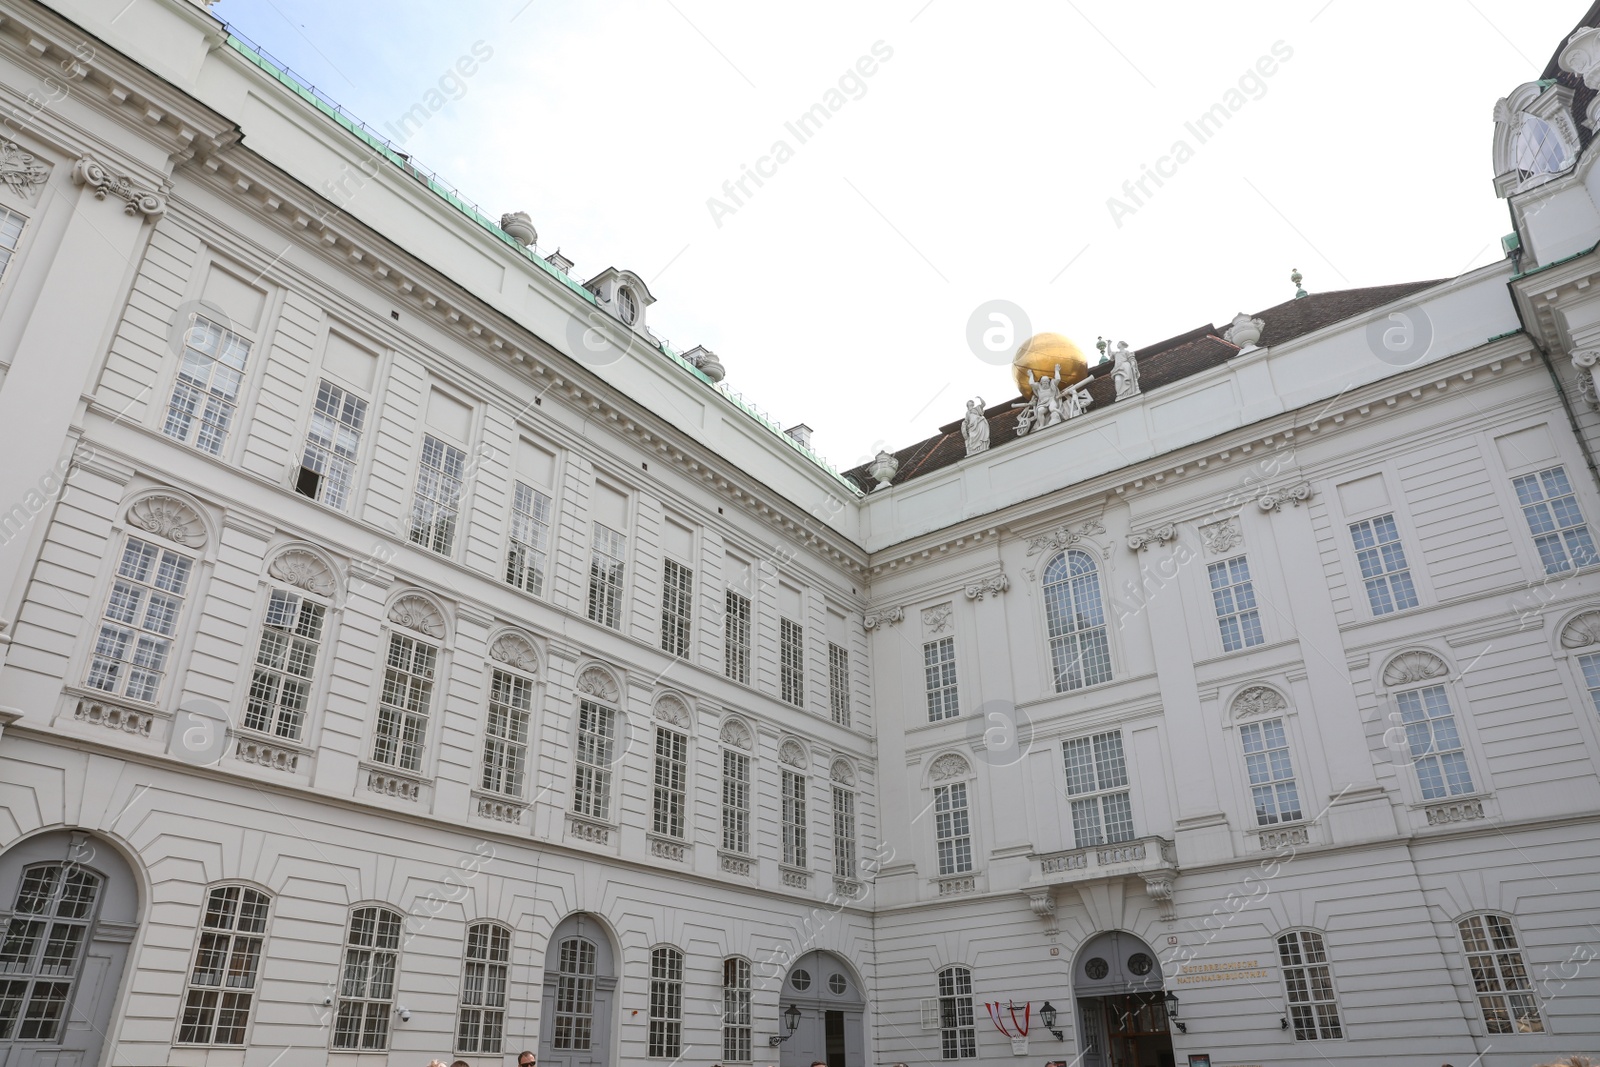 Photo of VIENNA, AUSTRIA - APRIL 26, 2019: Court Library and Augustinian Wing of Hofburg Palace